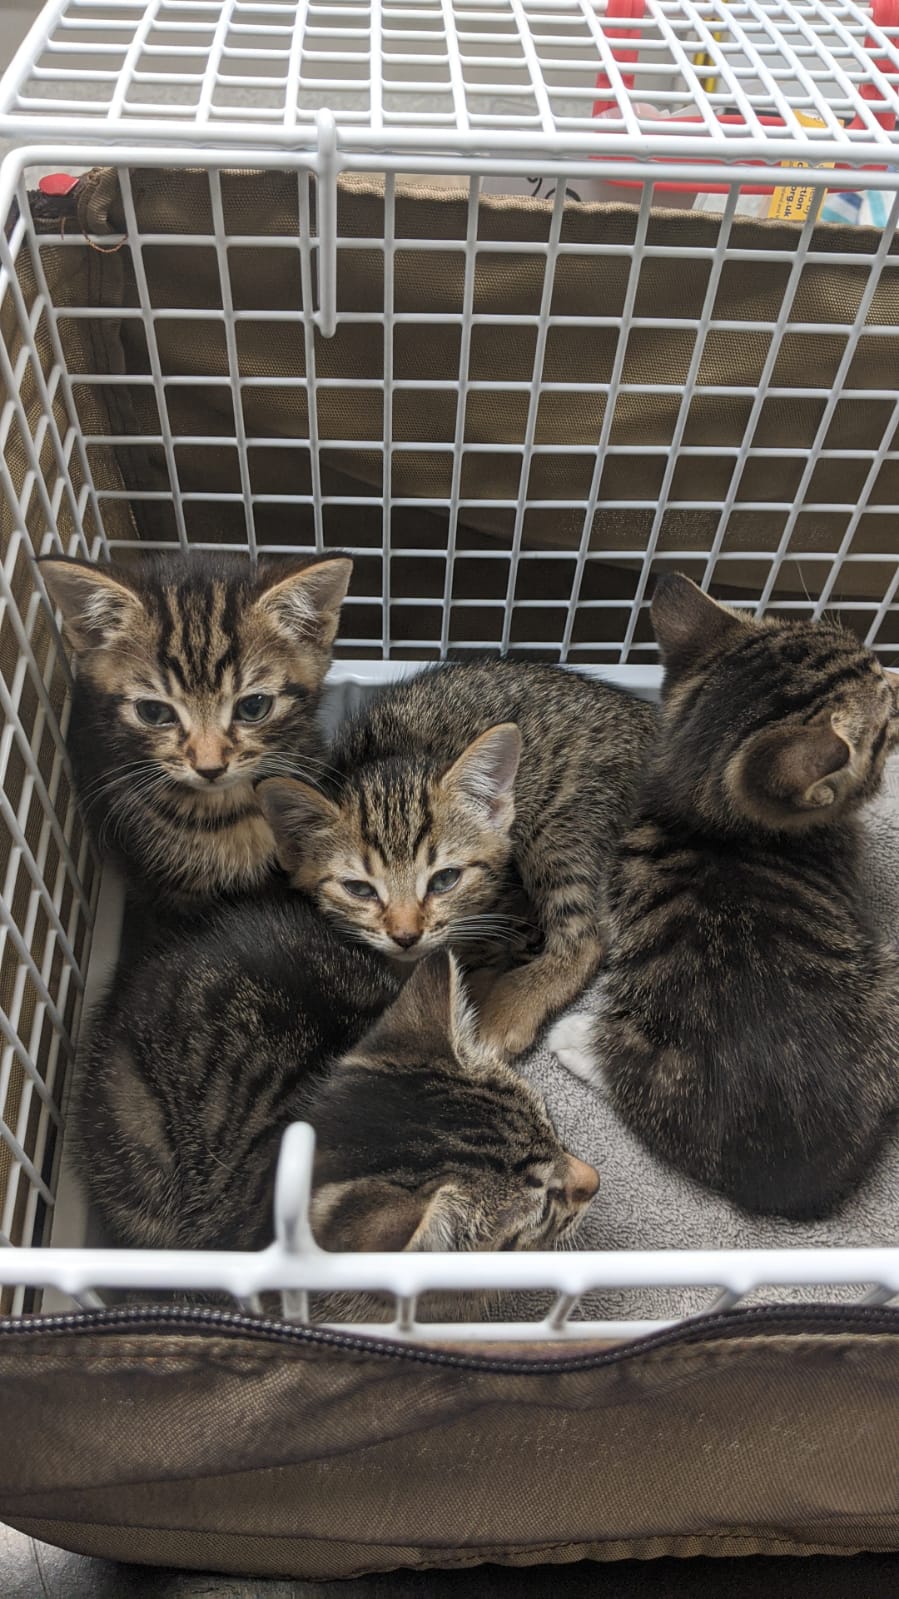 17 cats were rescued from one house in Harrow, including a number of kittens